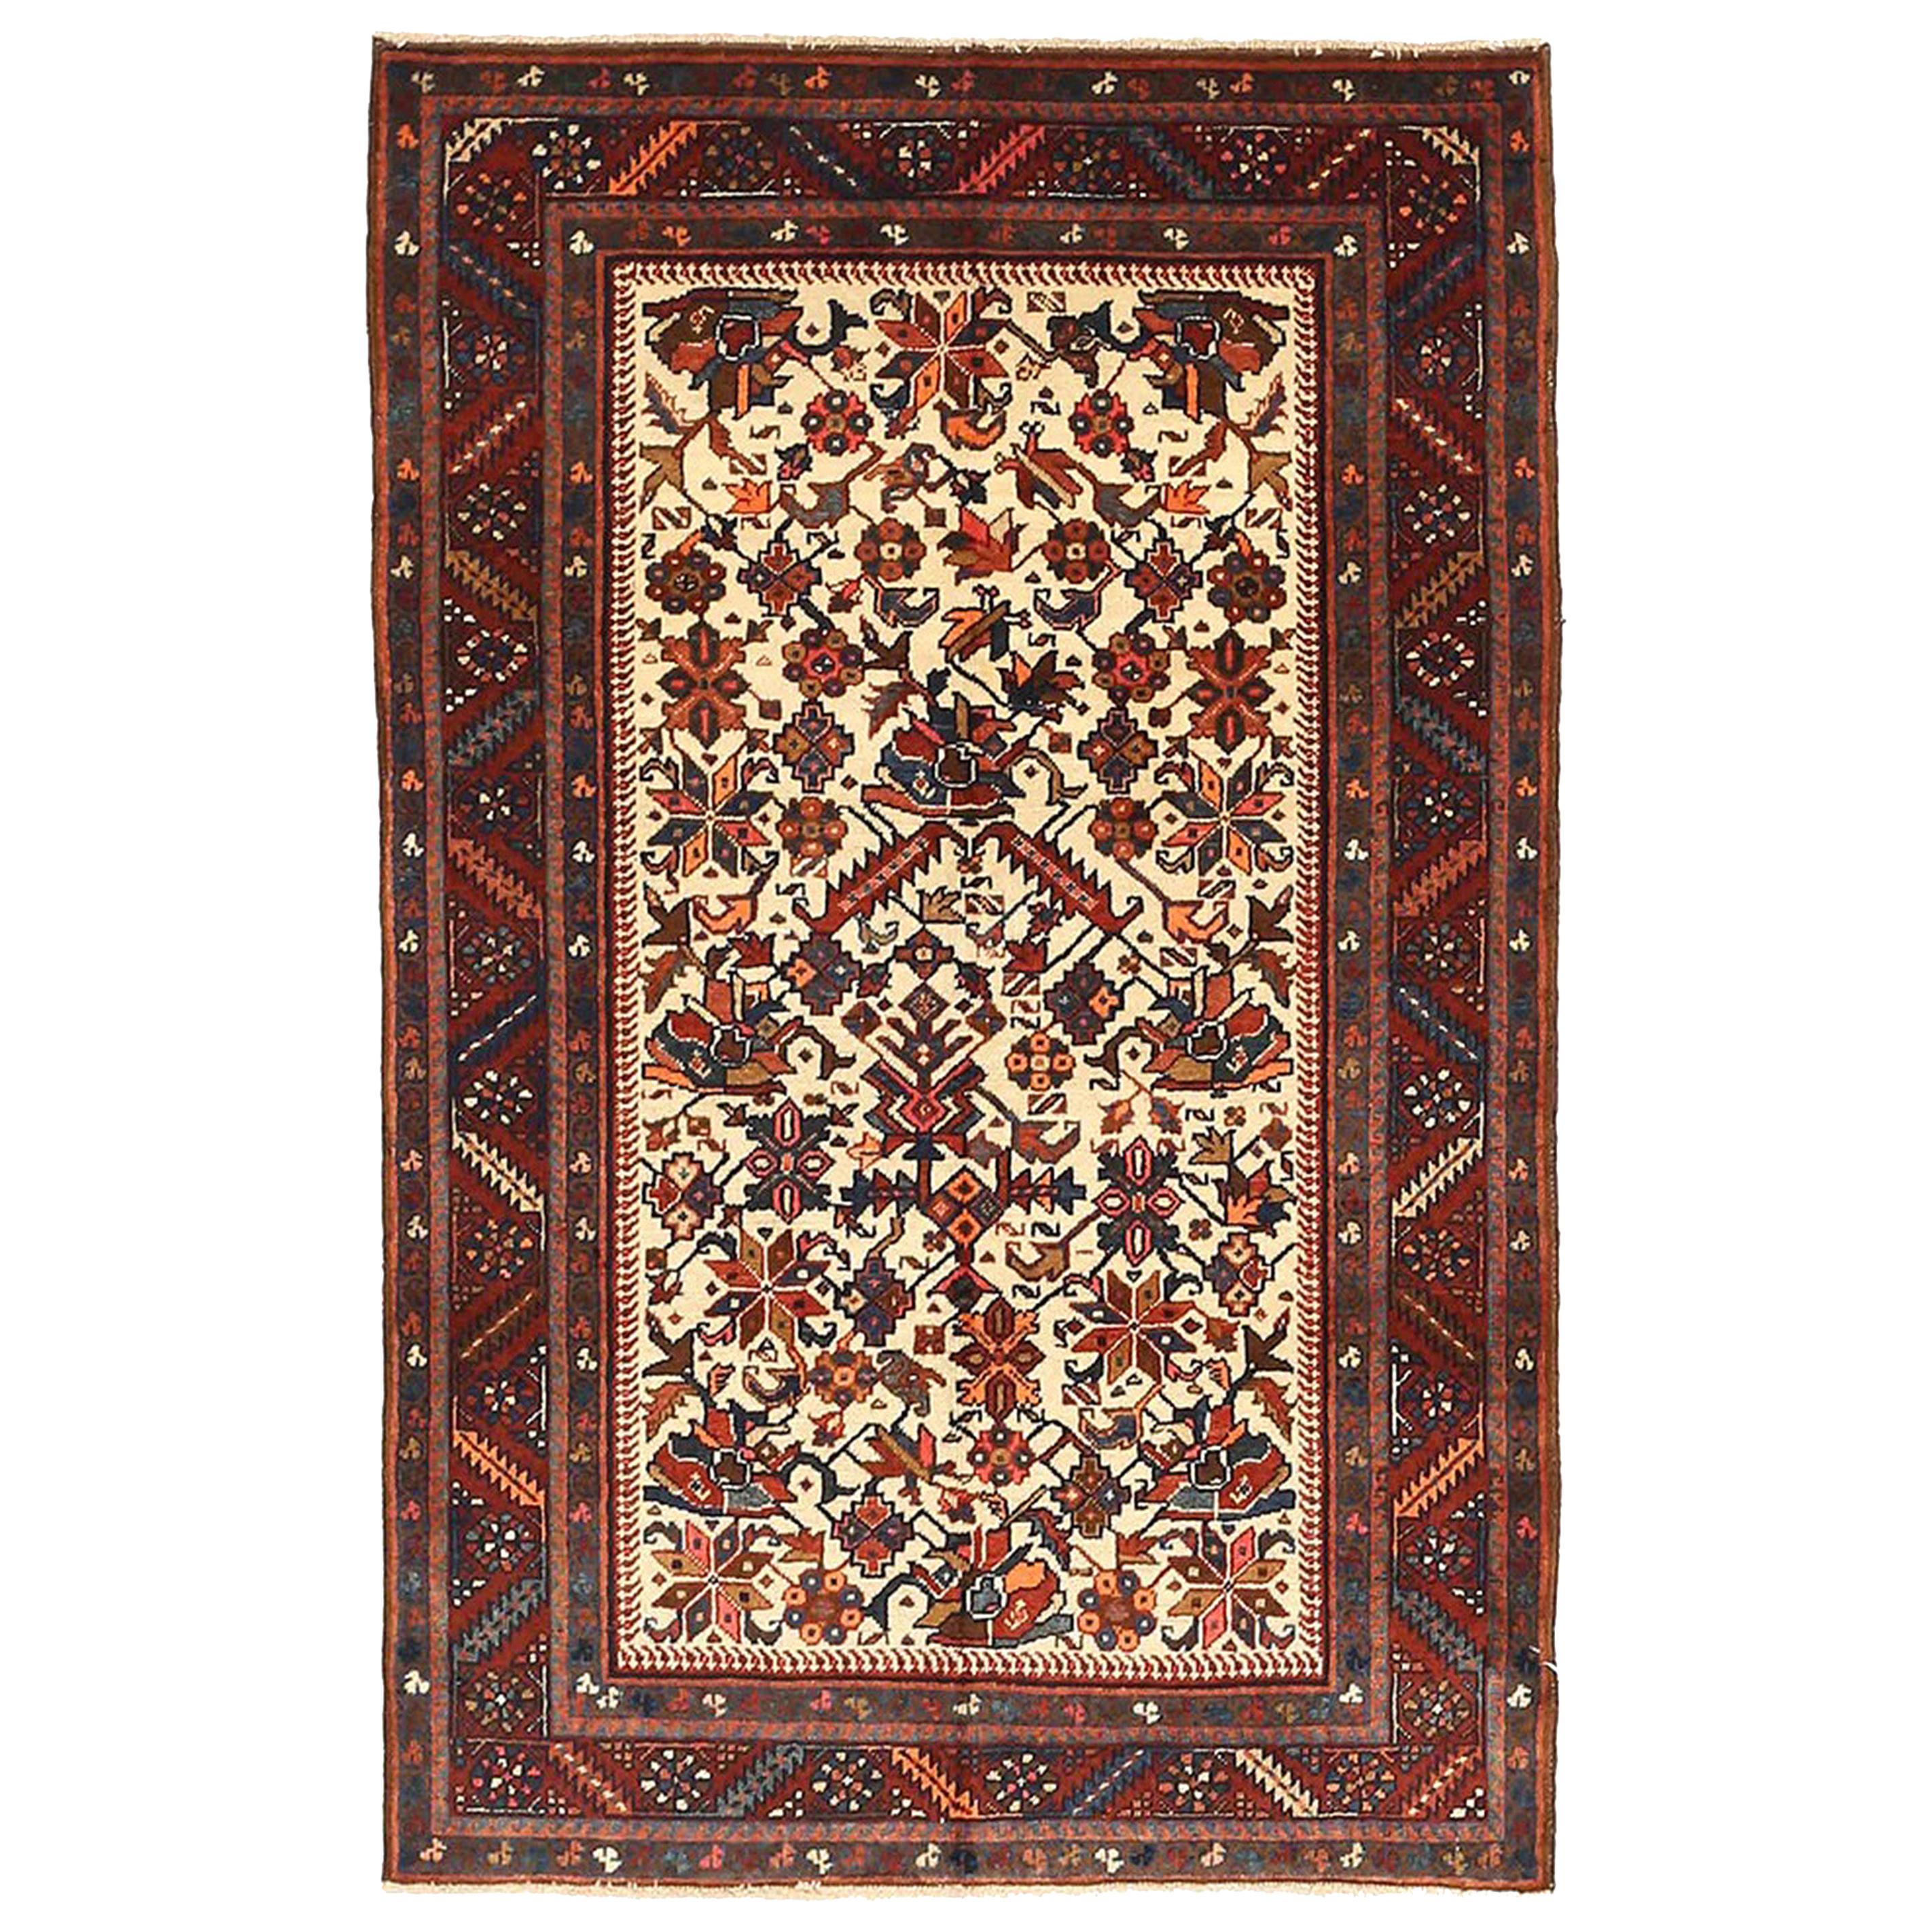 Antique Persian Heriz Rug with Navy and Red Floral Motifs on Ivory Field